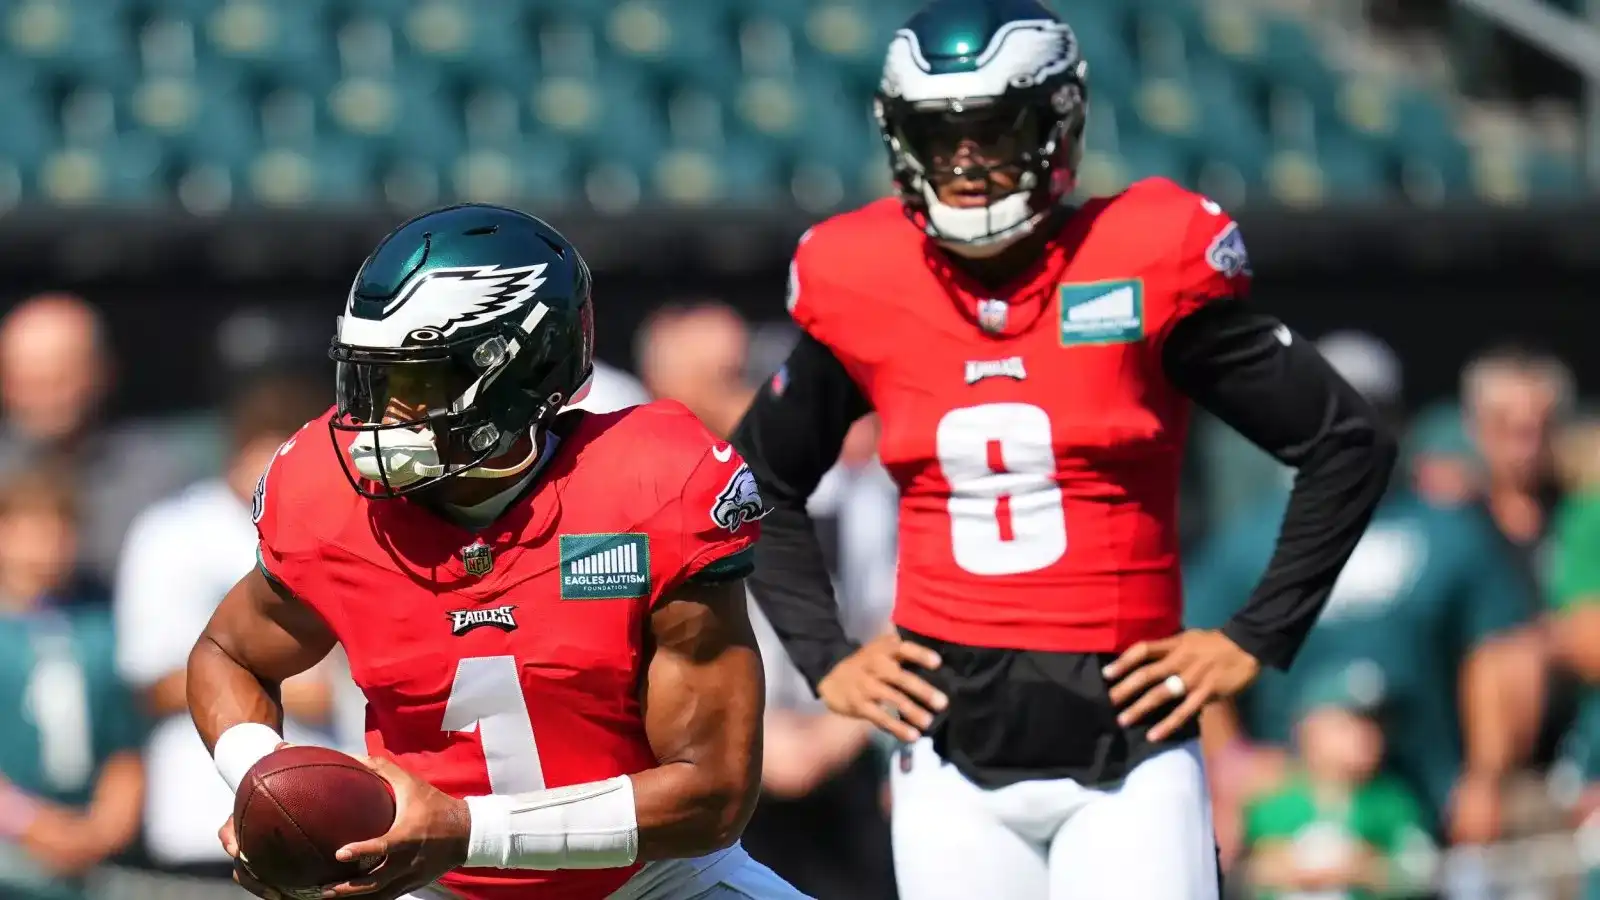 Philadelphia Eagles: Jalen Hurts illness and backup - what we know